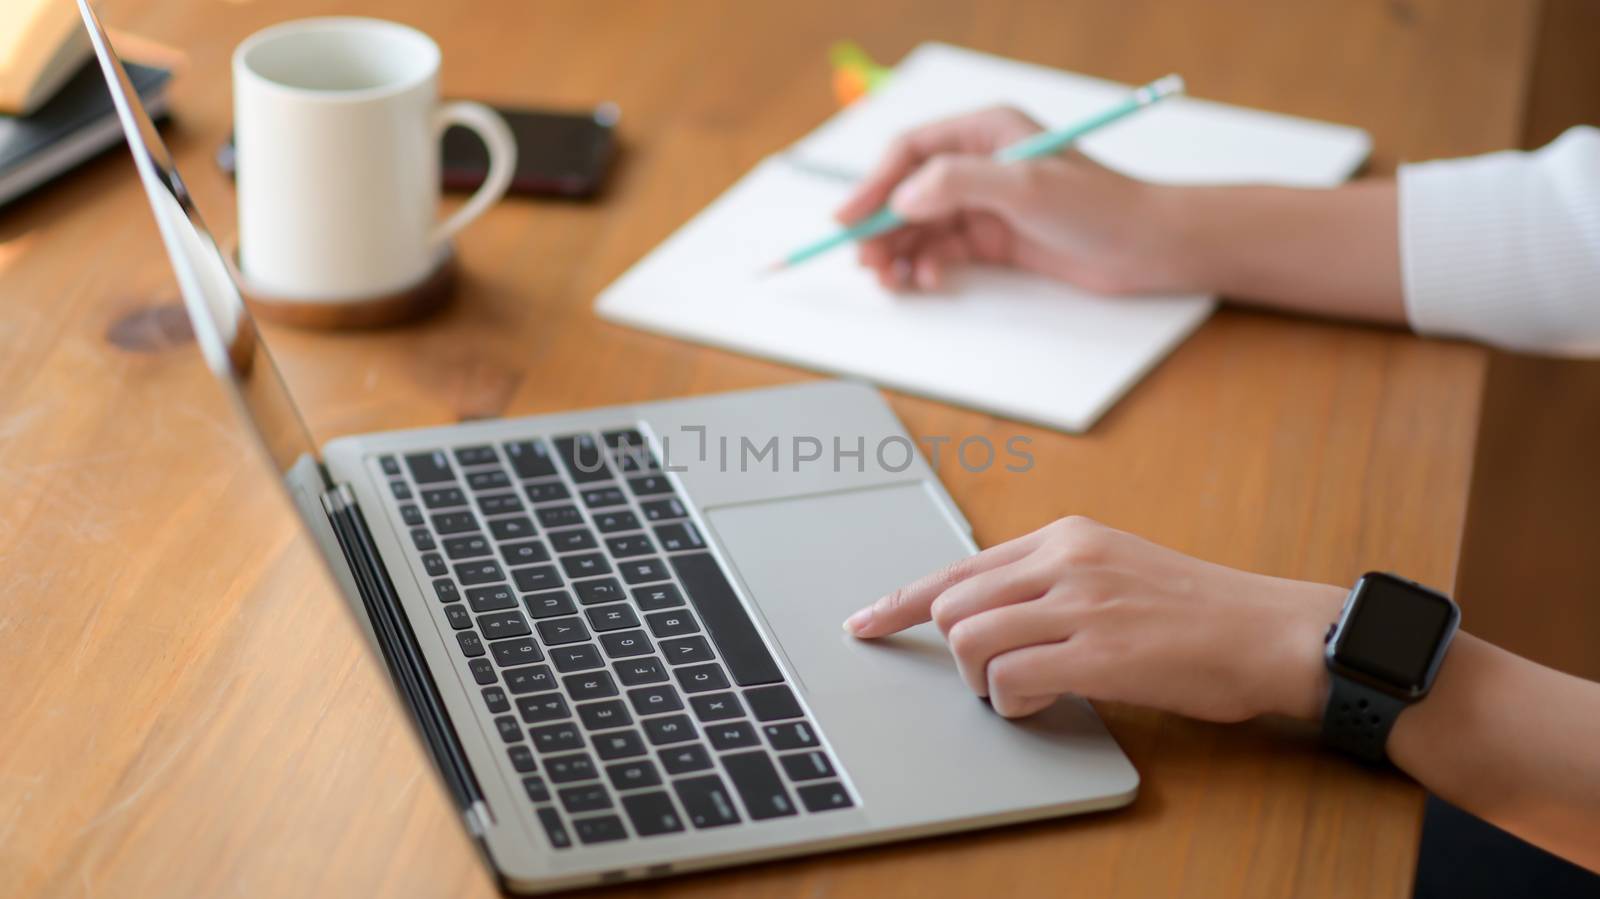 The hand of a young woman using a laptop and writing a report, S by poungsaed